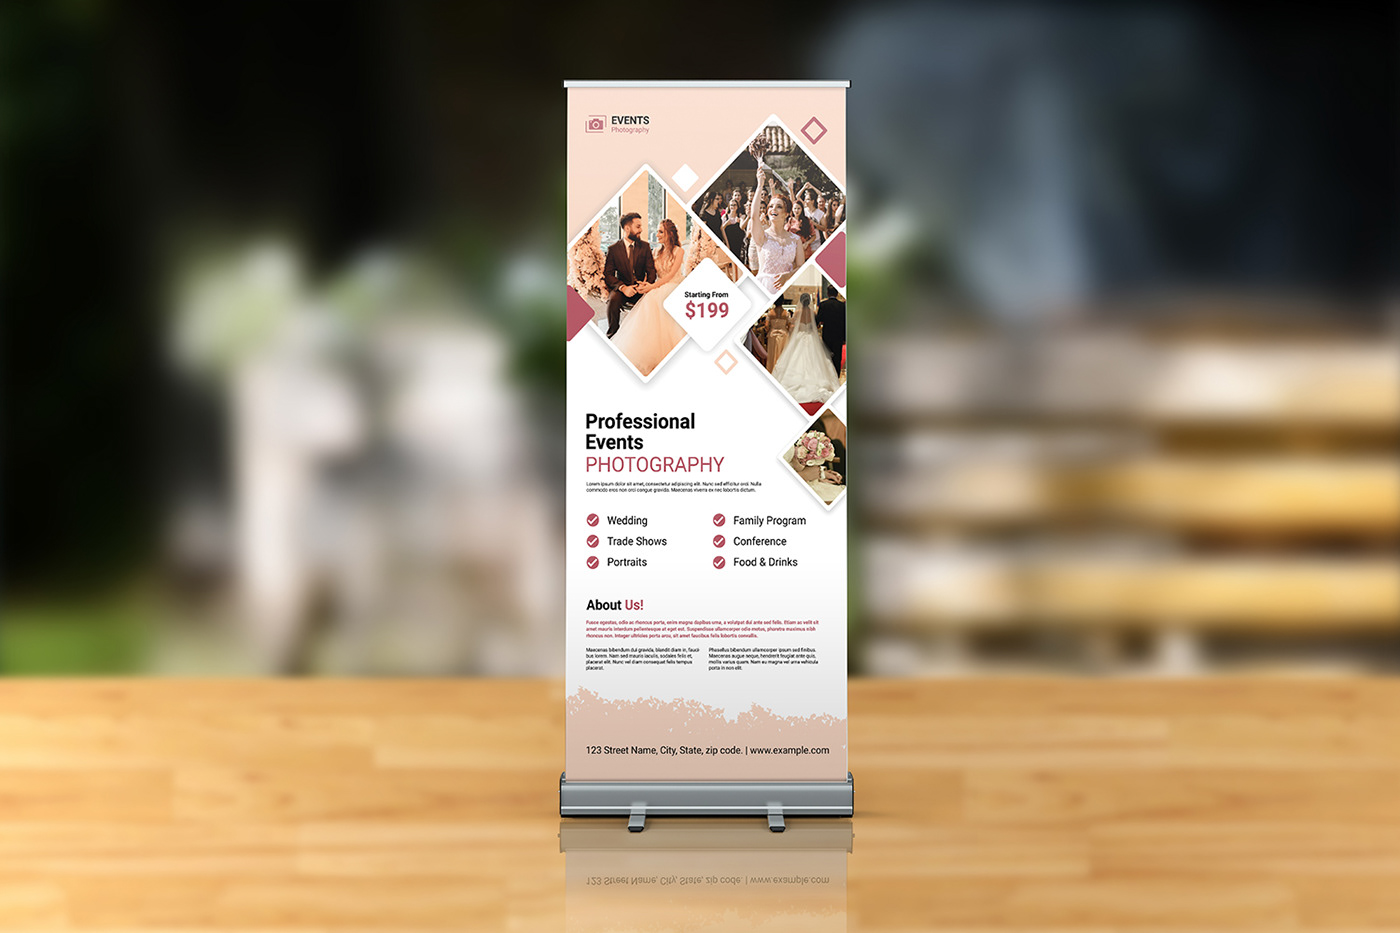 photography banner rollup banner photography marketing adverising marketing   poster photographer roll-up banner photography signage